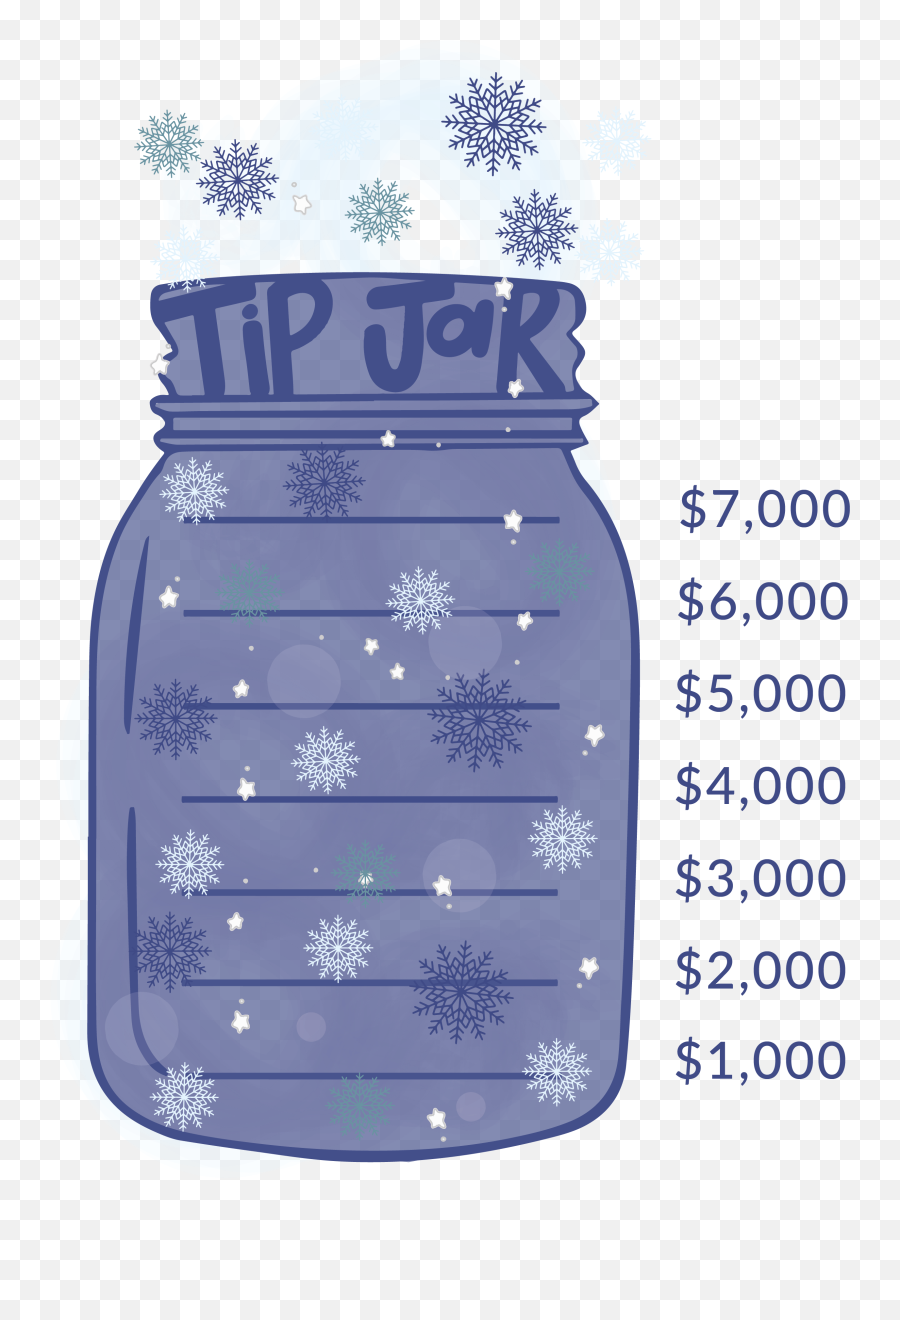 Donate Or Join - The Flurry Emoji,Tip Jar Png